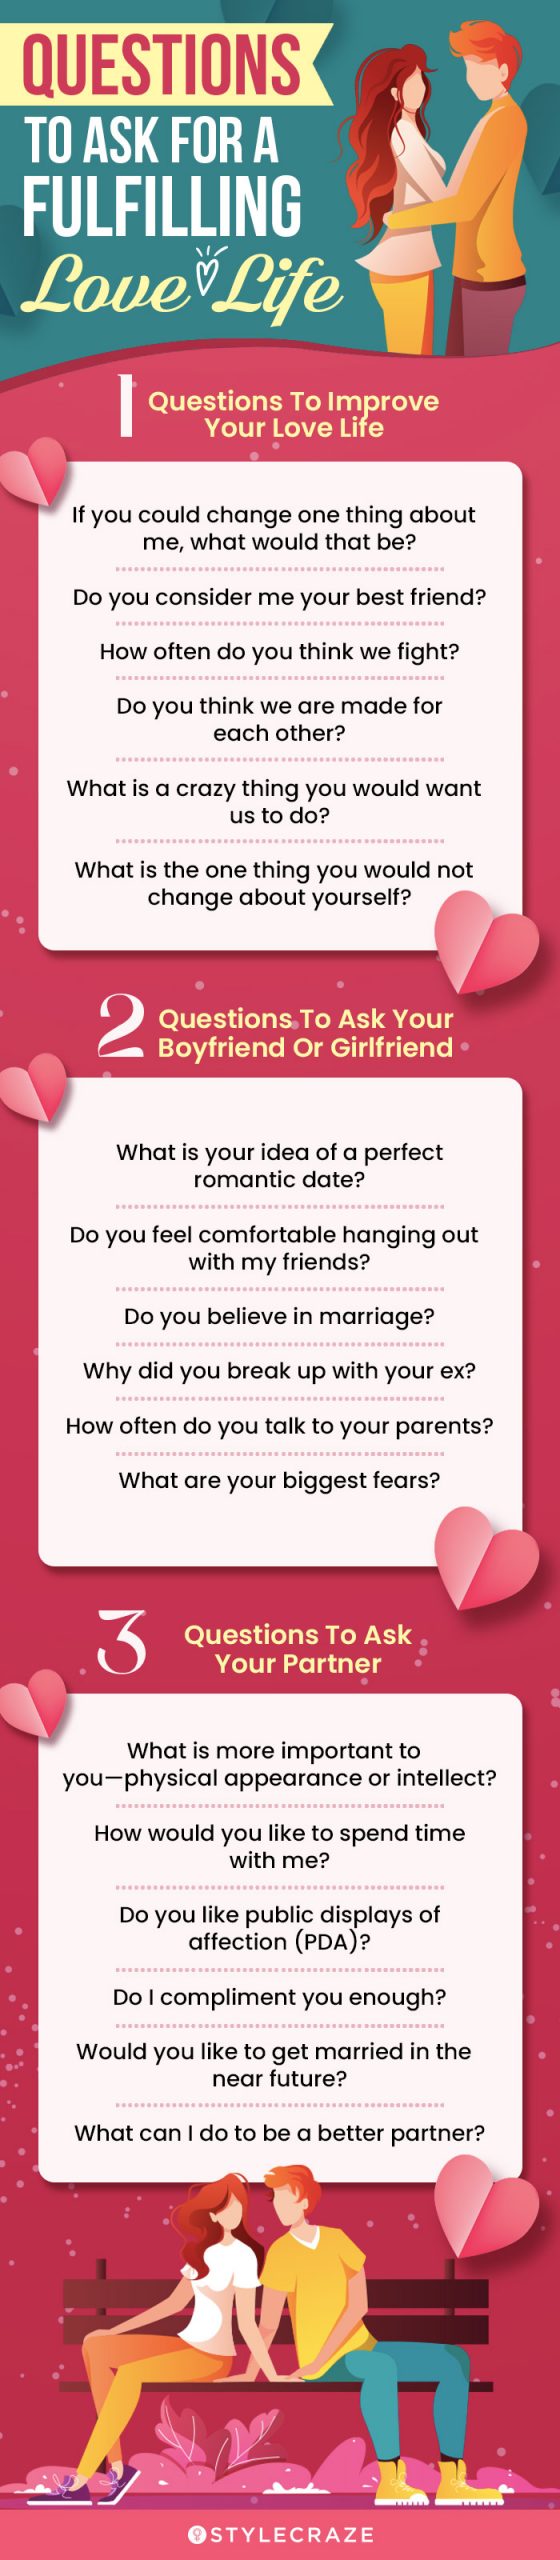 questions to ask for a fulfilling love life (infographic)